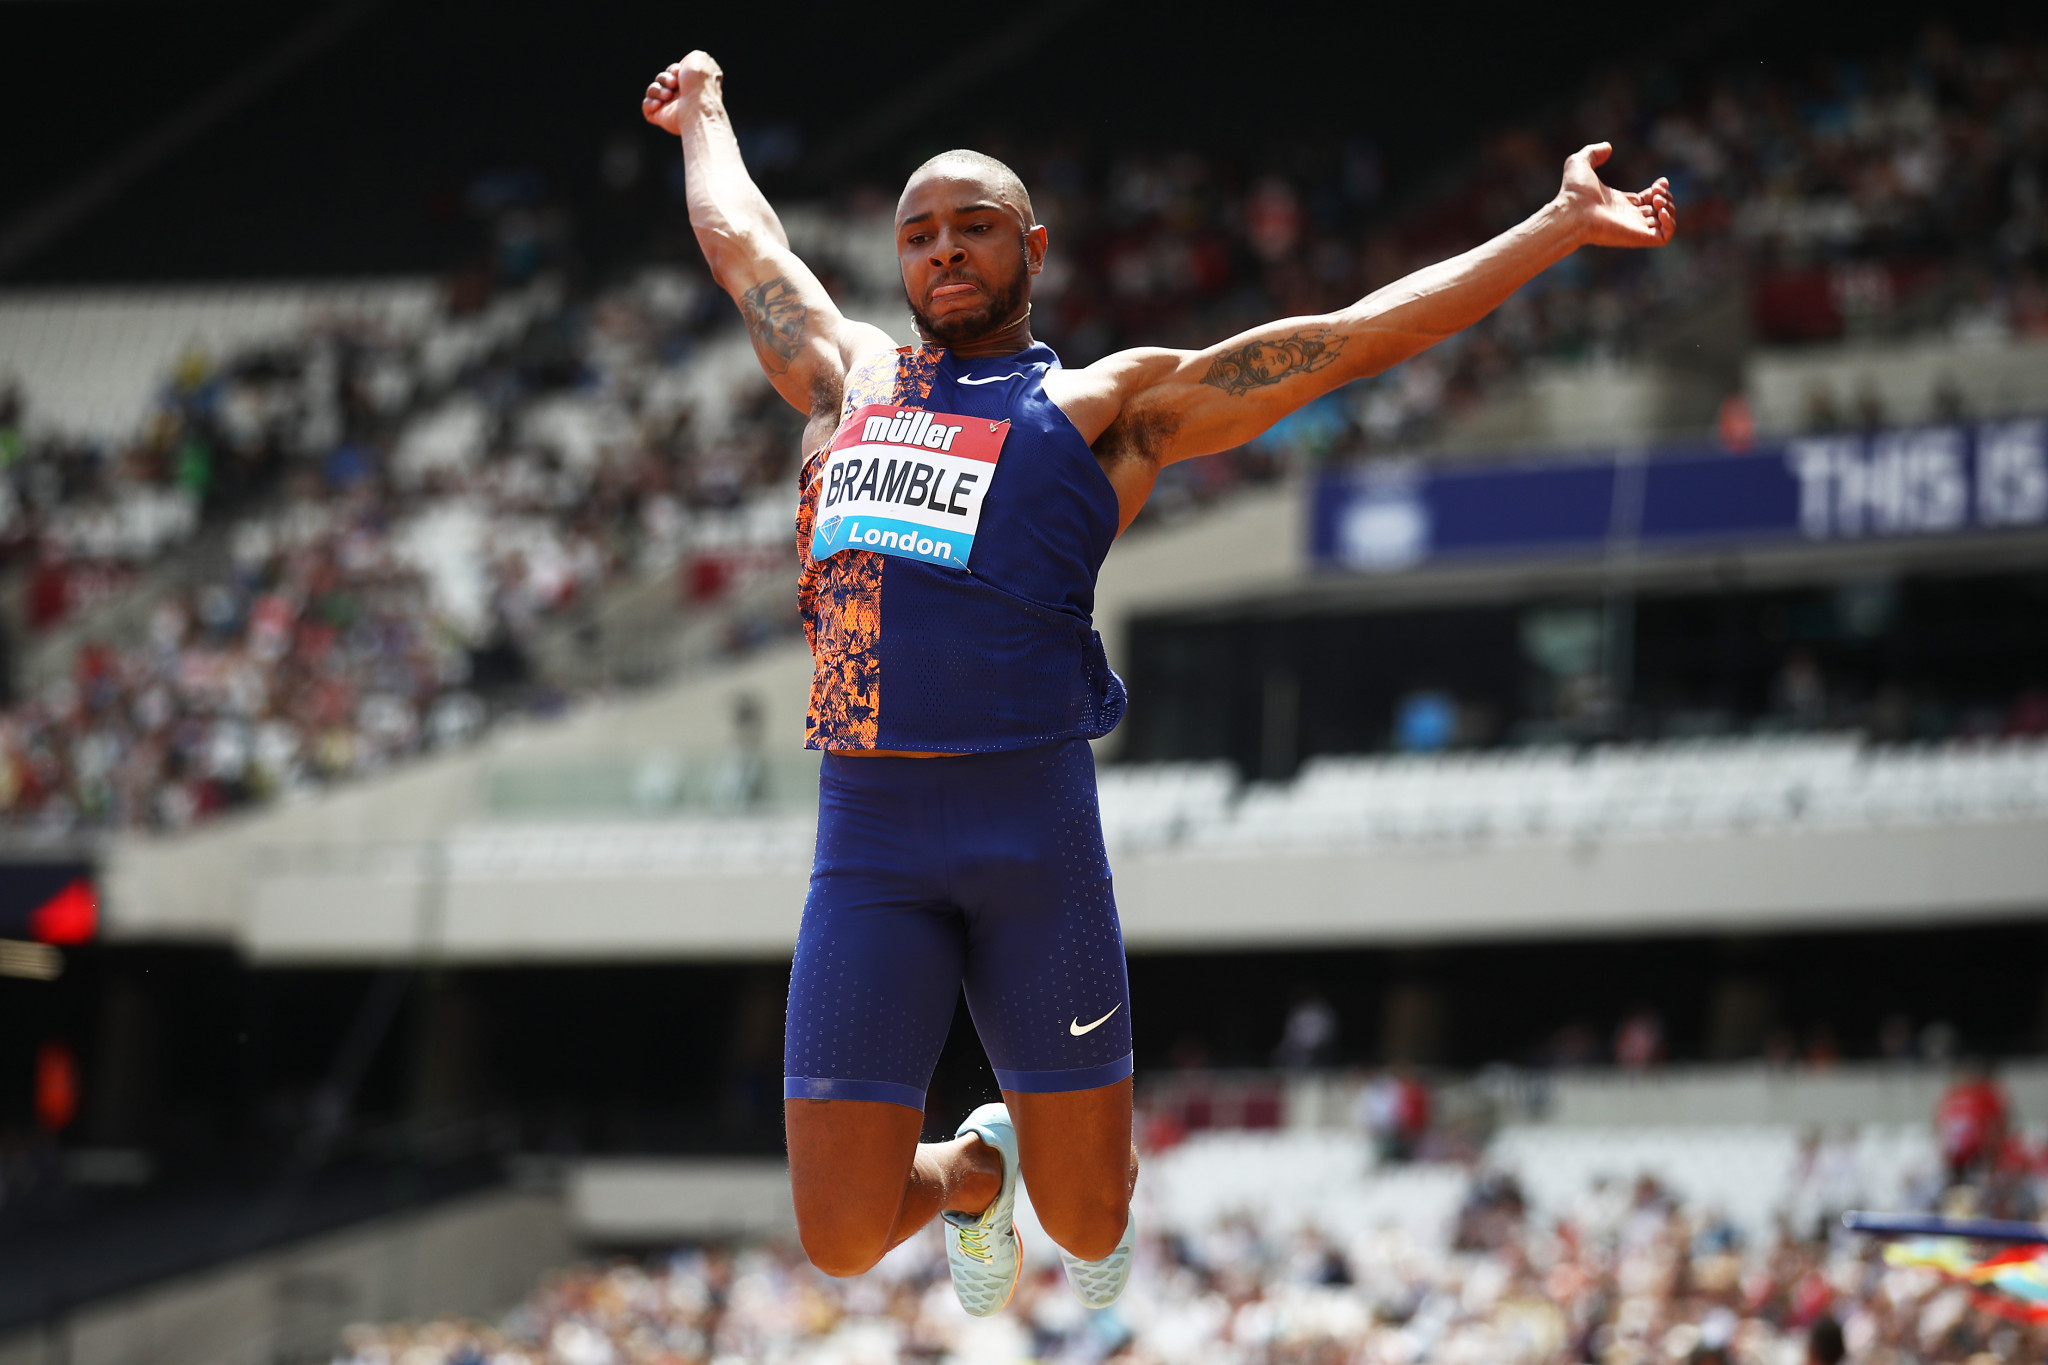 British long jumper Bramble reaches fundraising goal to aid Tokyo 2020 ambition